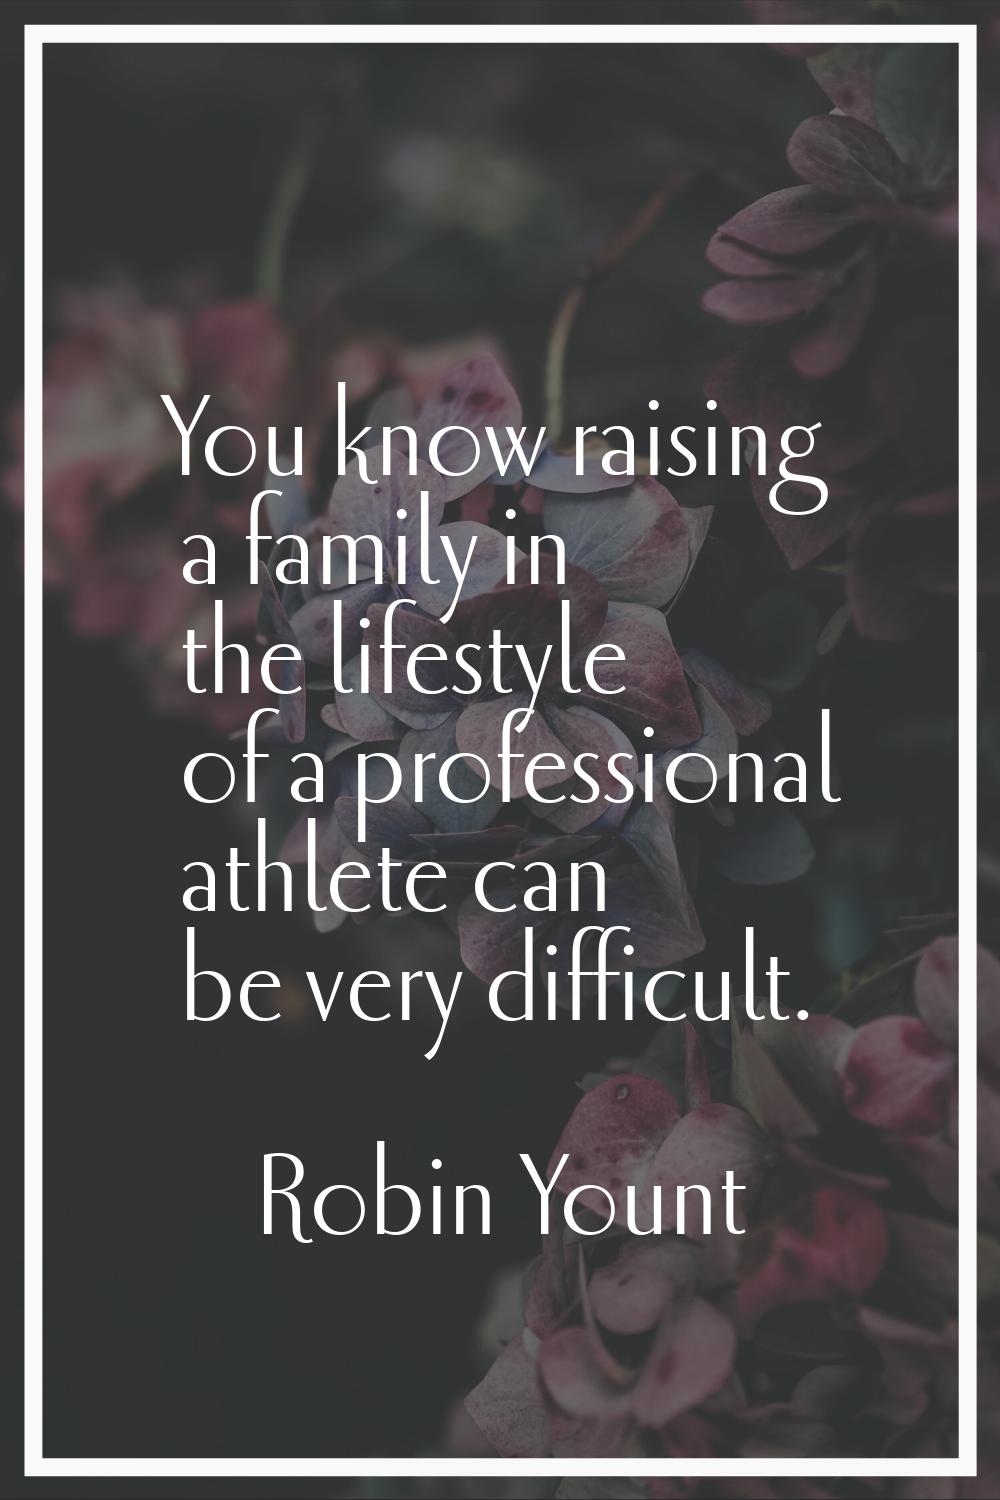 You know raising a family in the lifestyle of a professional athlete can be very difficult.